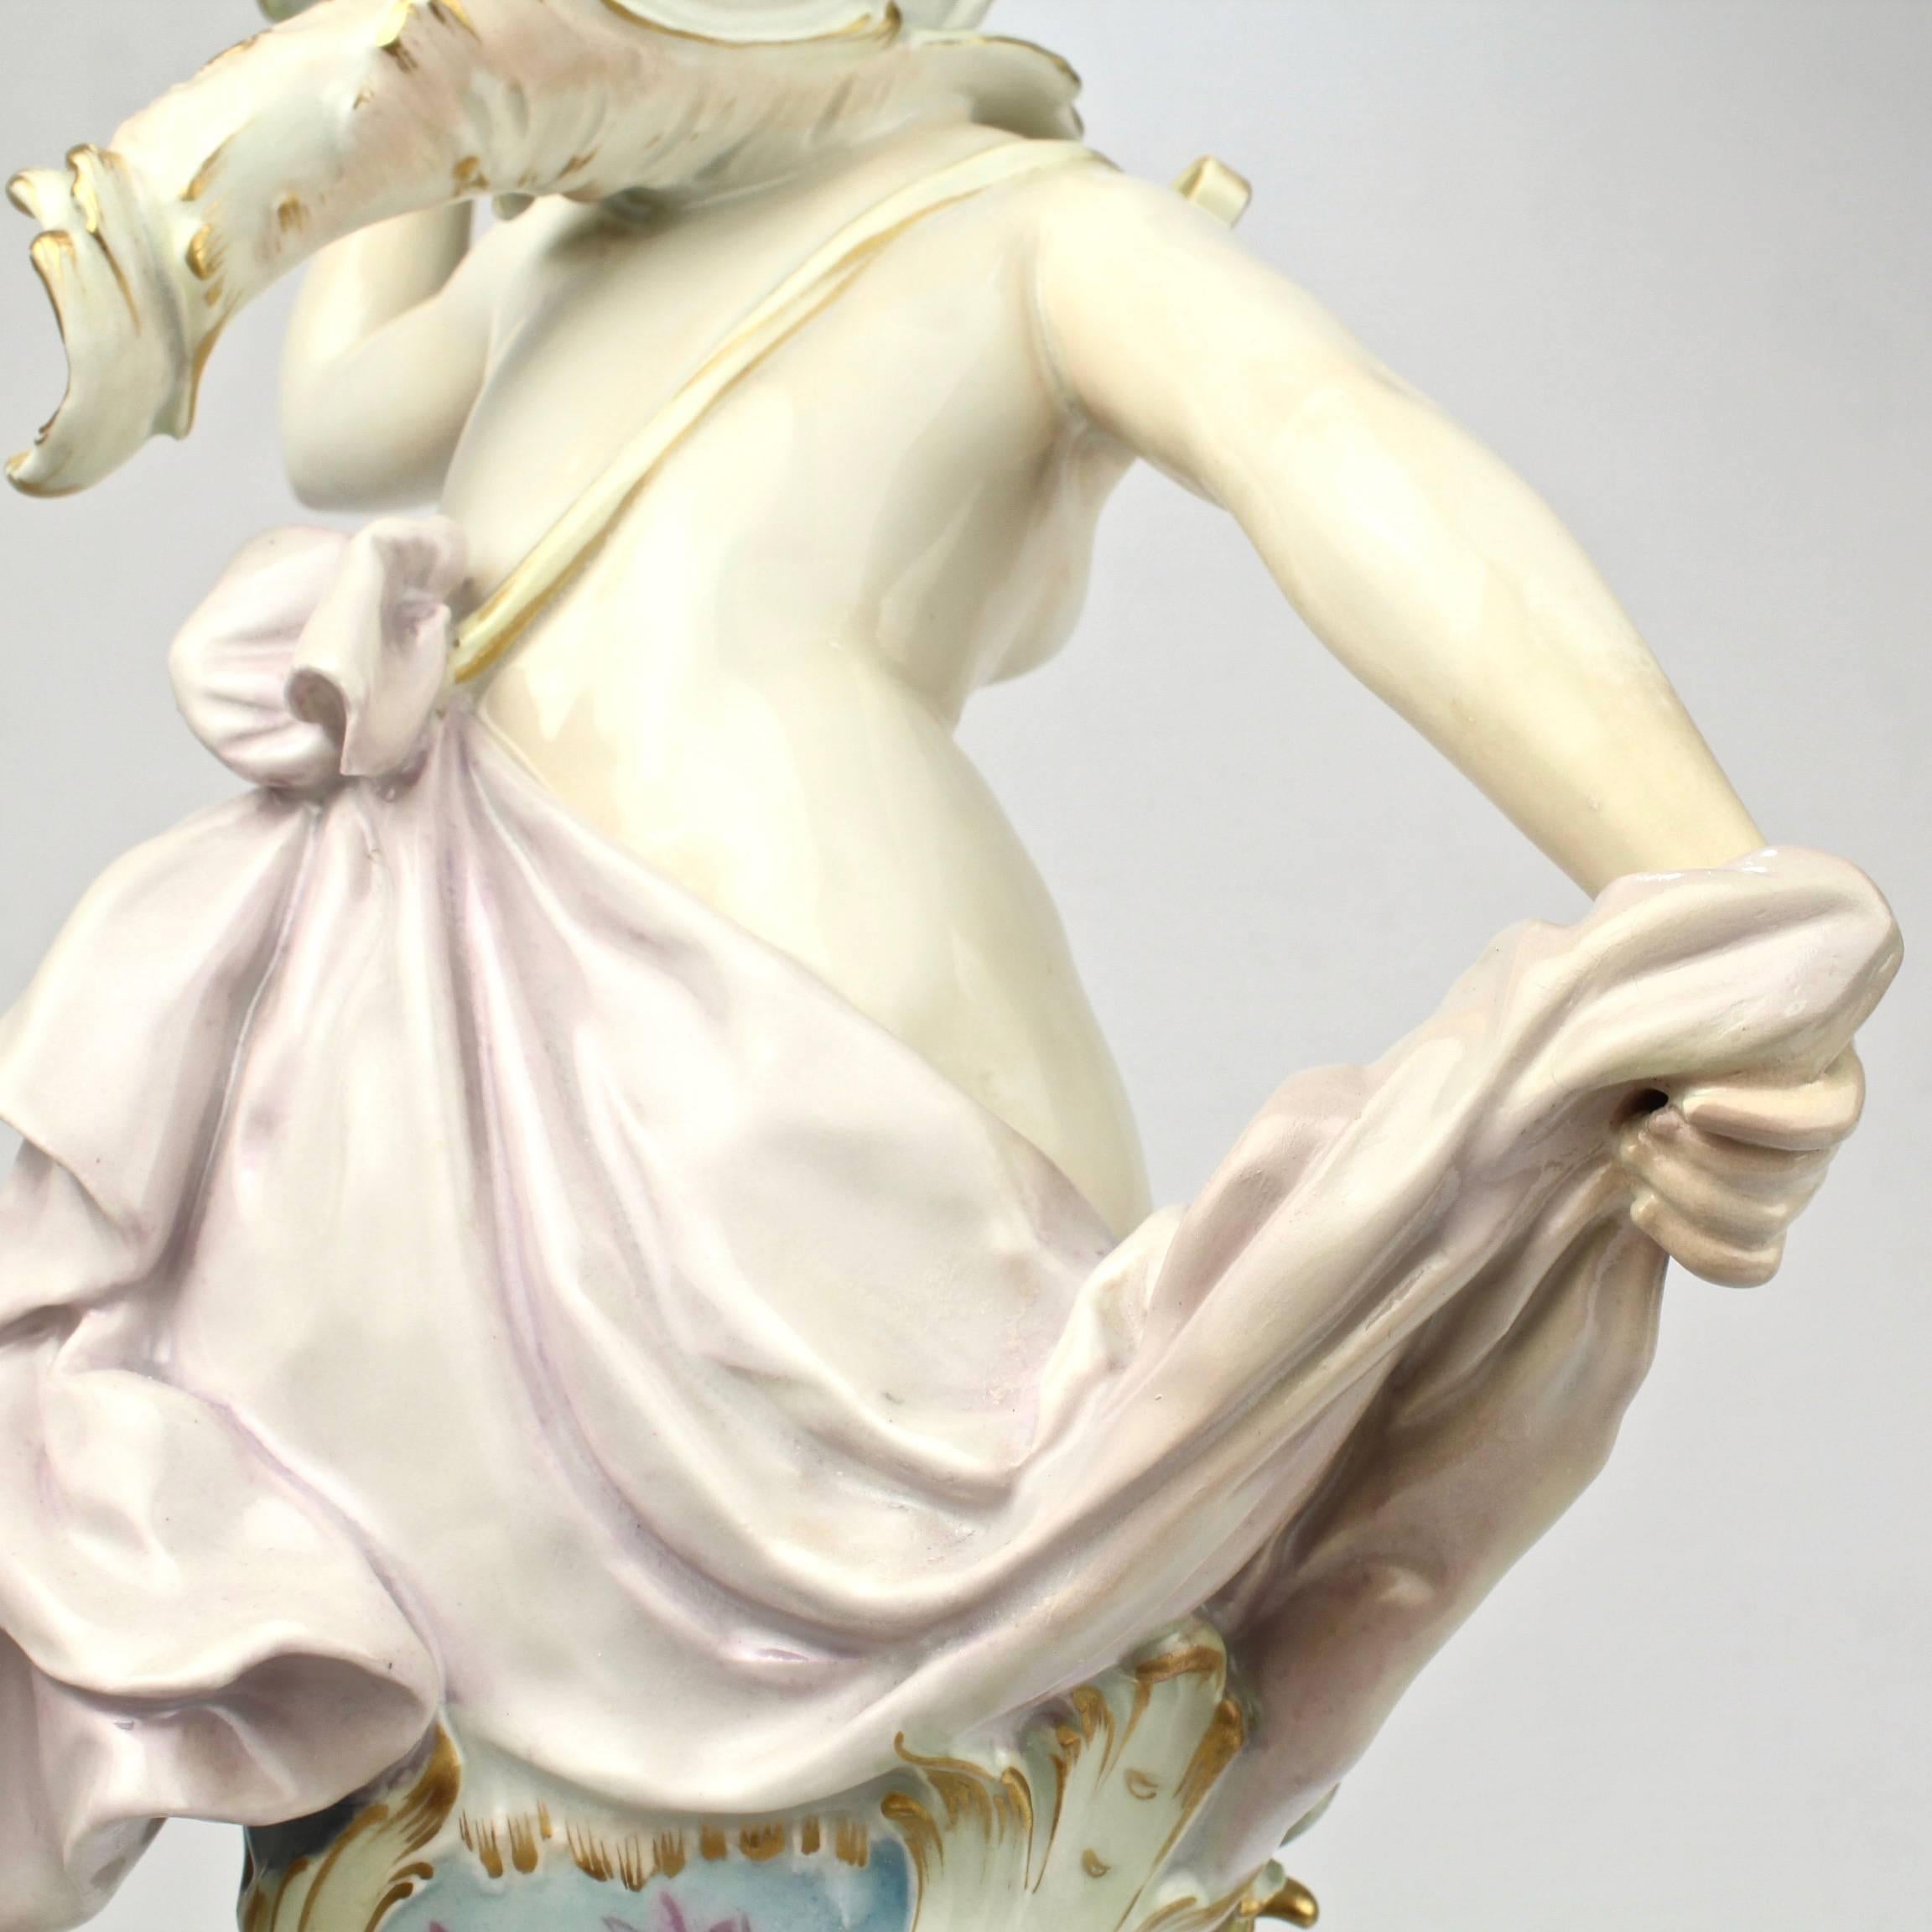 19th Century Antique Royal Berlin KPM Figural Porcelain Candlestick with Weichmalerei Decor